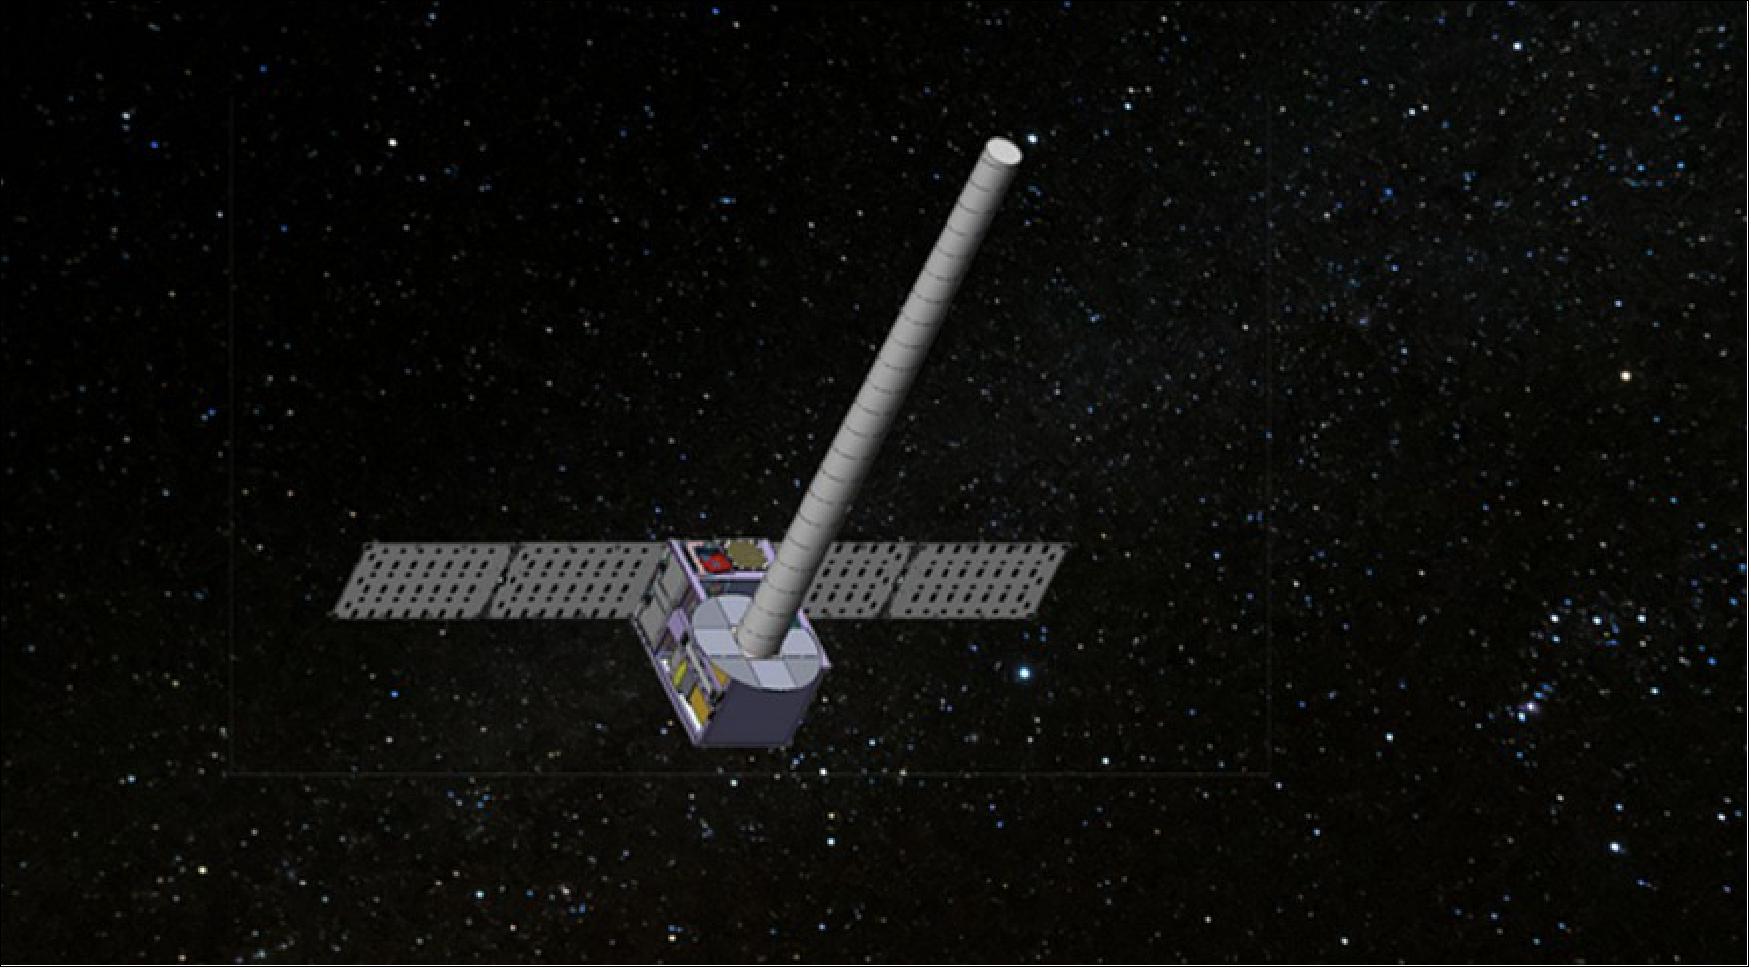 Figure 5: Roccor, a company owned by Redwire, developed a deployable L-band antenna that can receive and transmit Link 16 signals via satellites (image credit: Redwire)